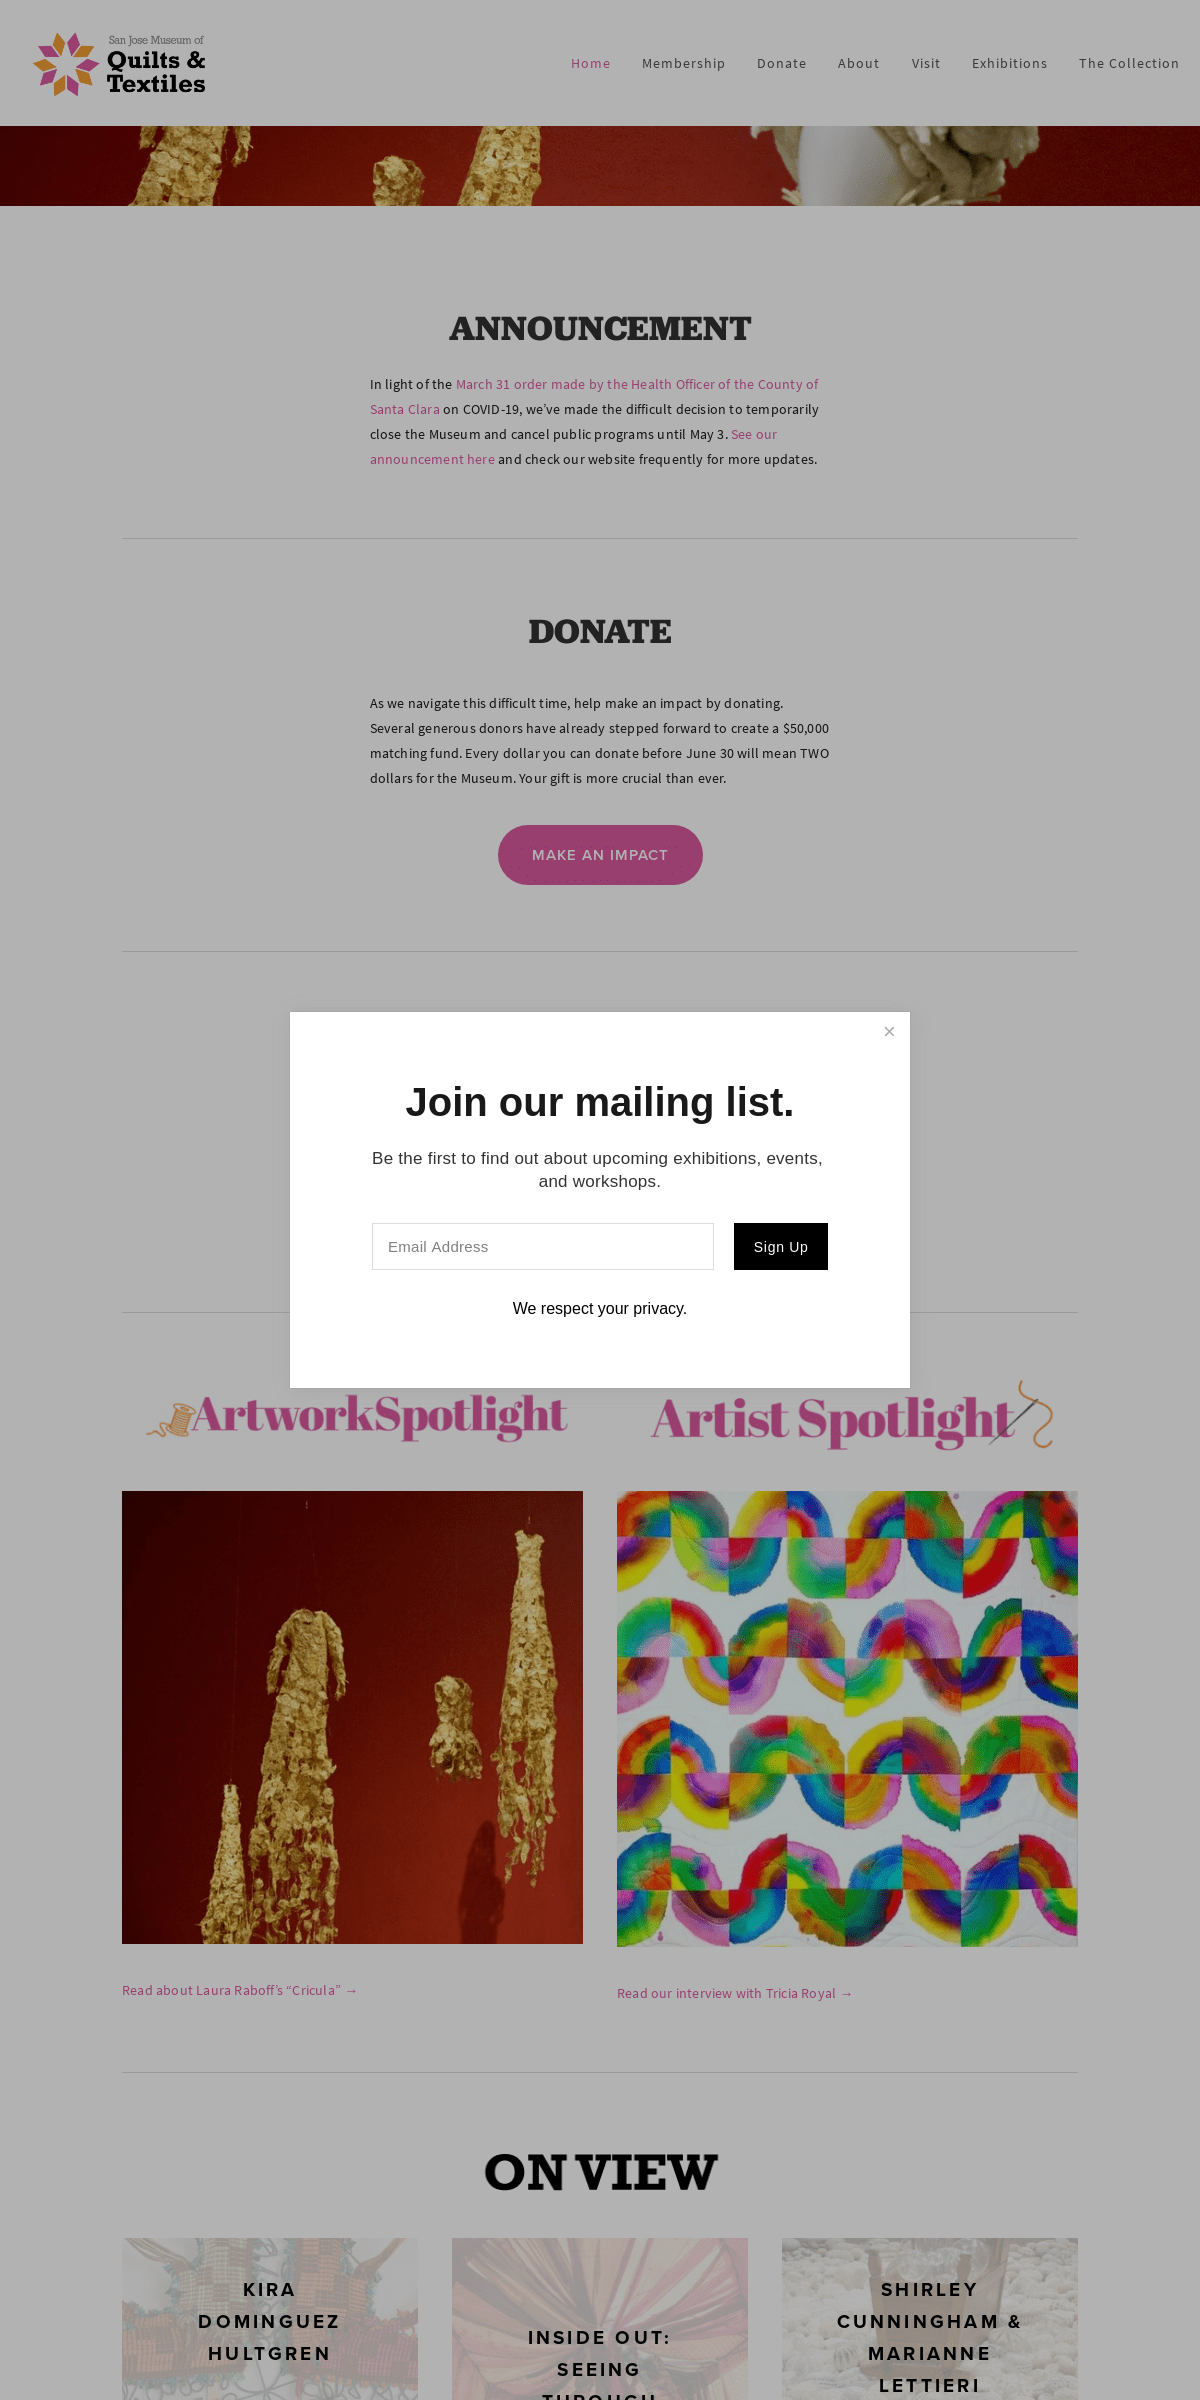 A complete backup of sjquiltmuseum.org